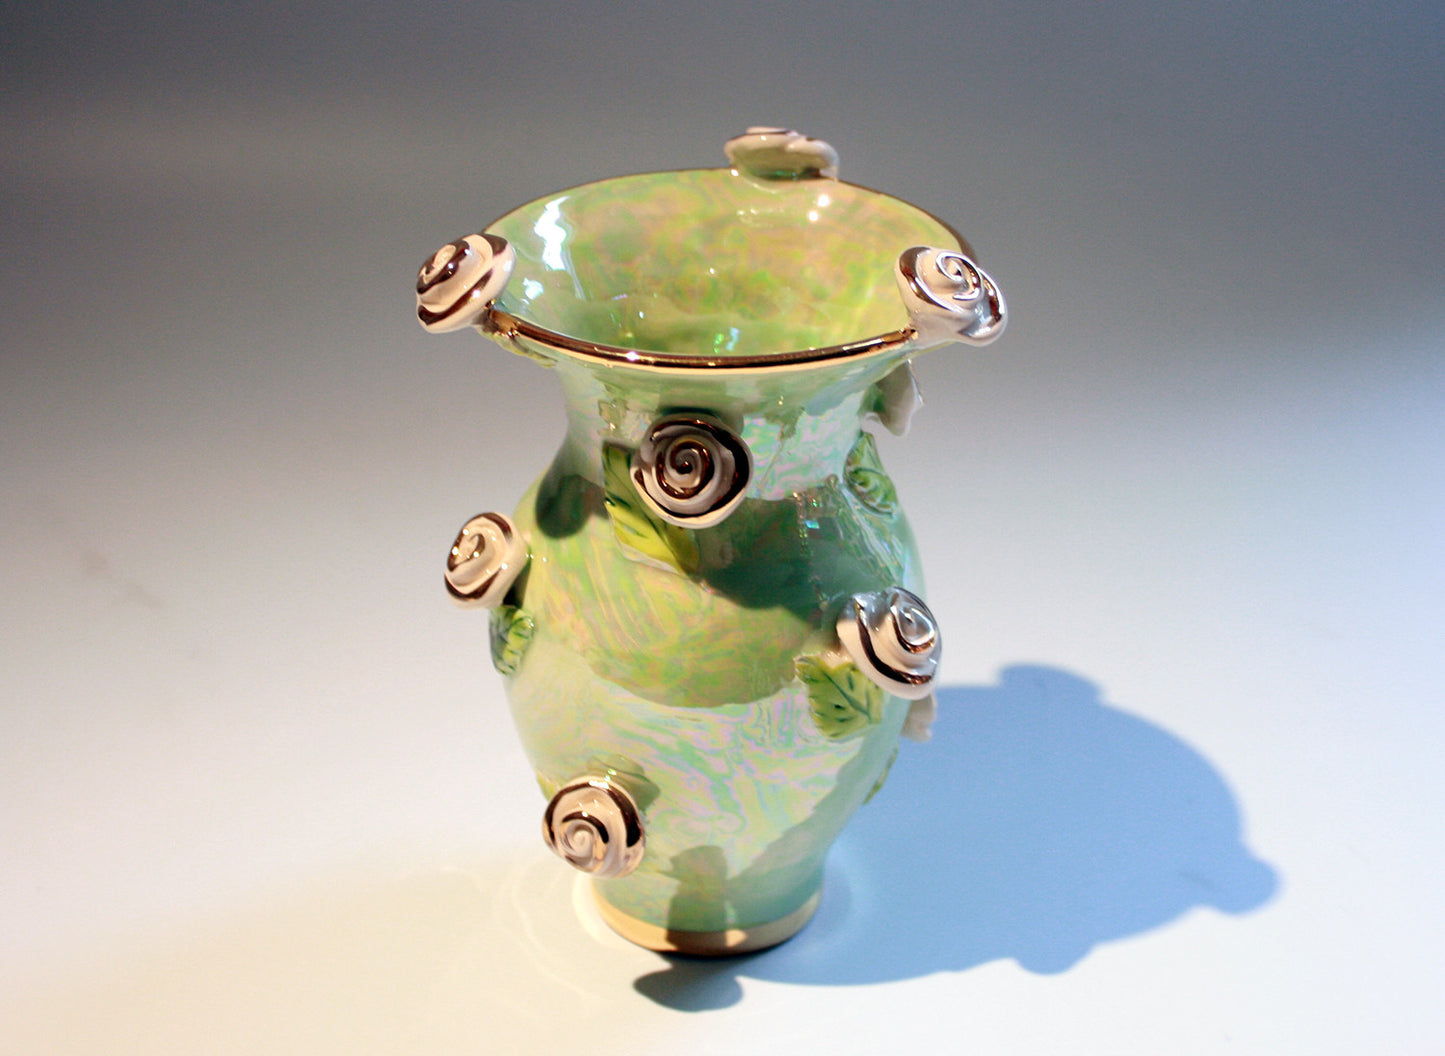 Tiny Rose Studded Vase Pale Green - MaryRoseYoung